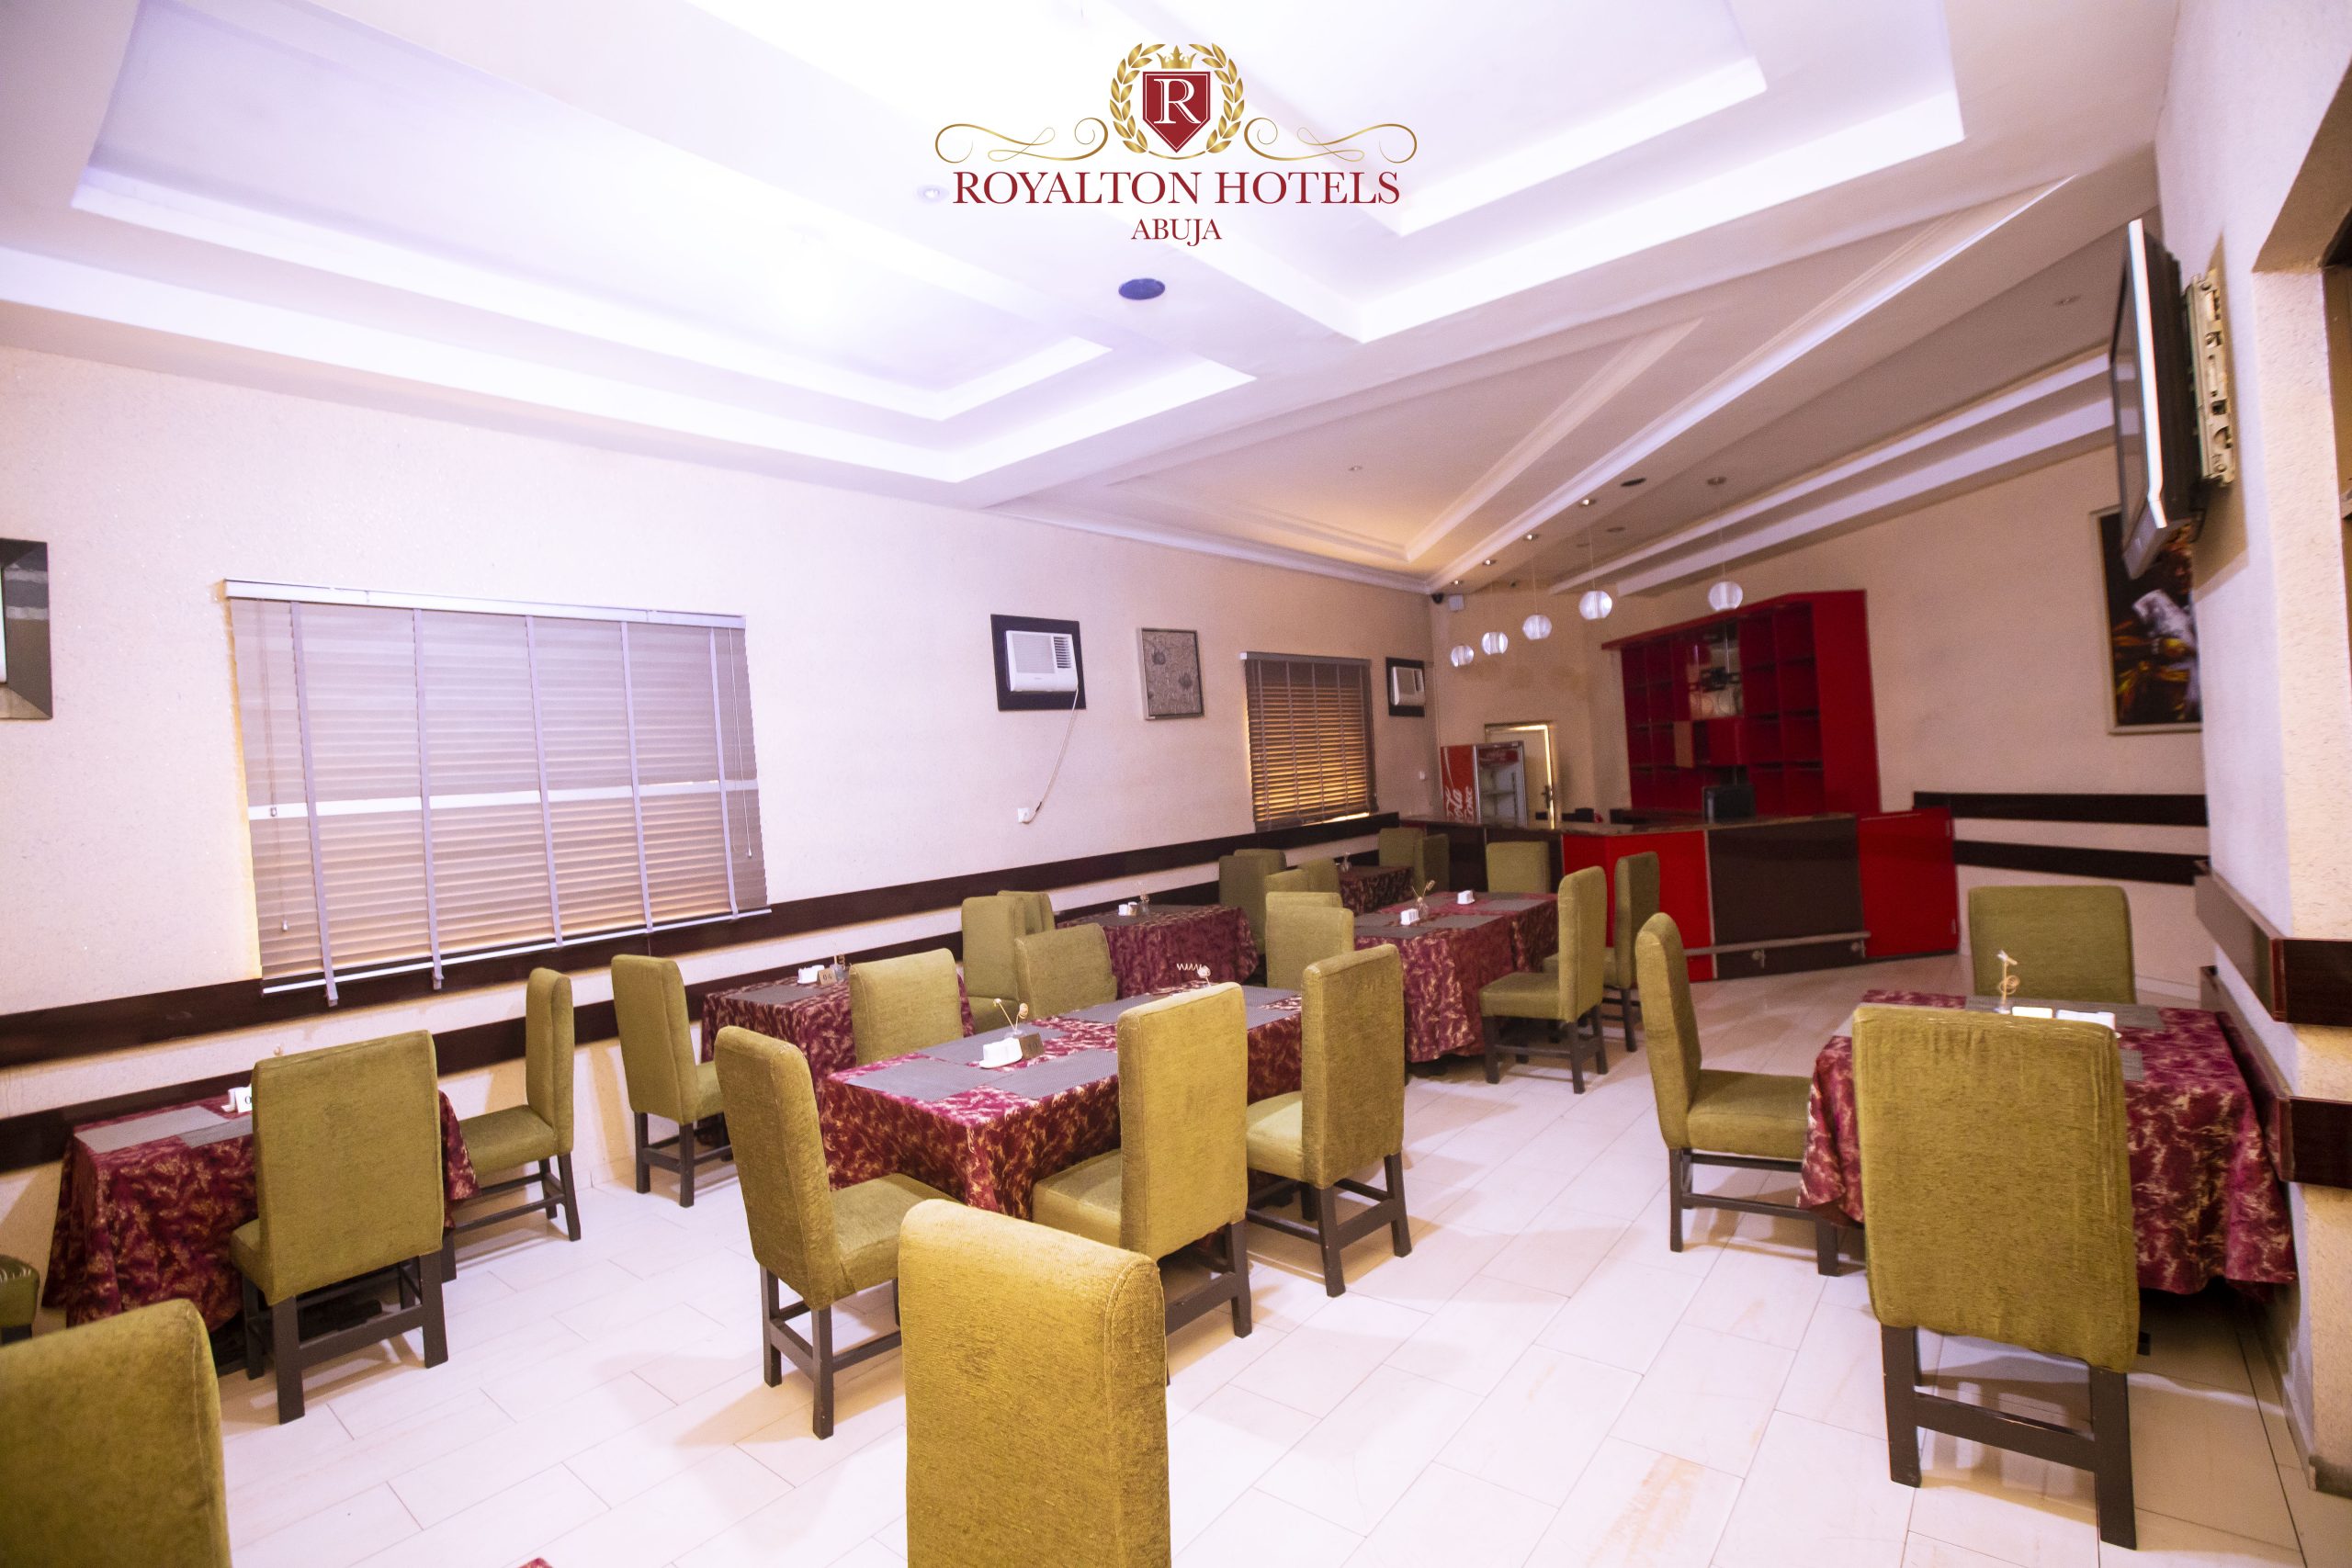 "Get your favourite african and international cuisine in royalton hotel Restaurant"